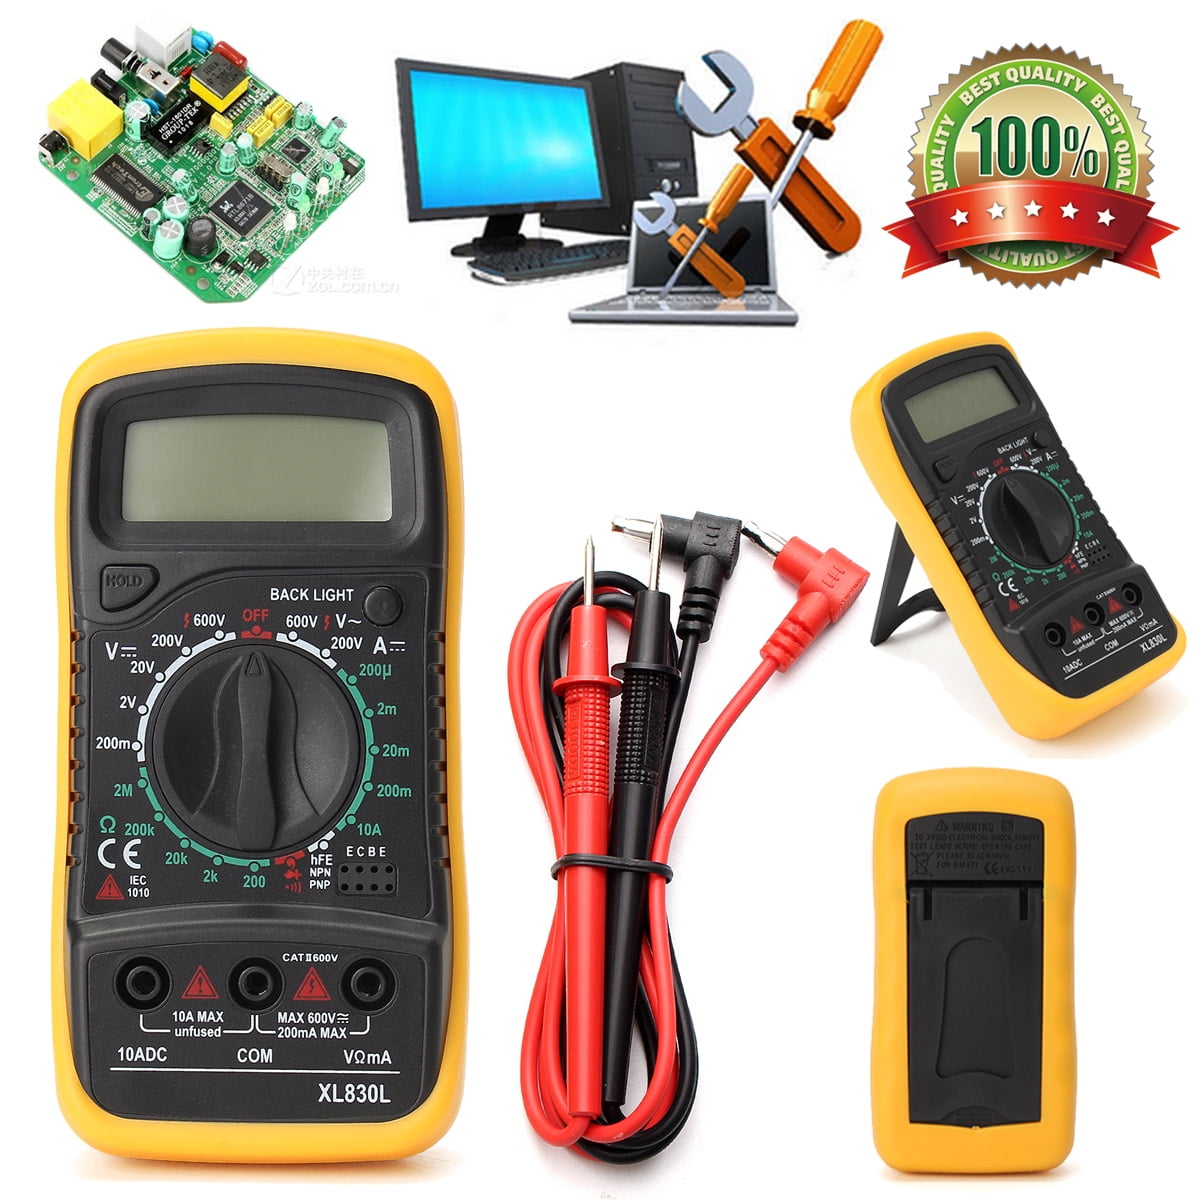 RM101 LCD Digital Multimeter DMM DC AC Volt Current Meter for Lab Factory W7T1 